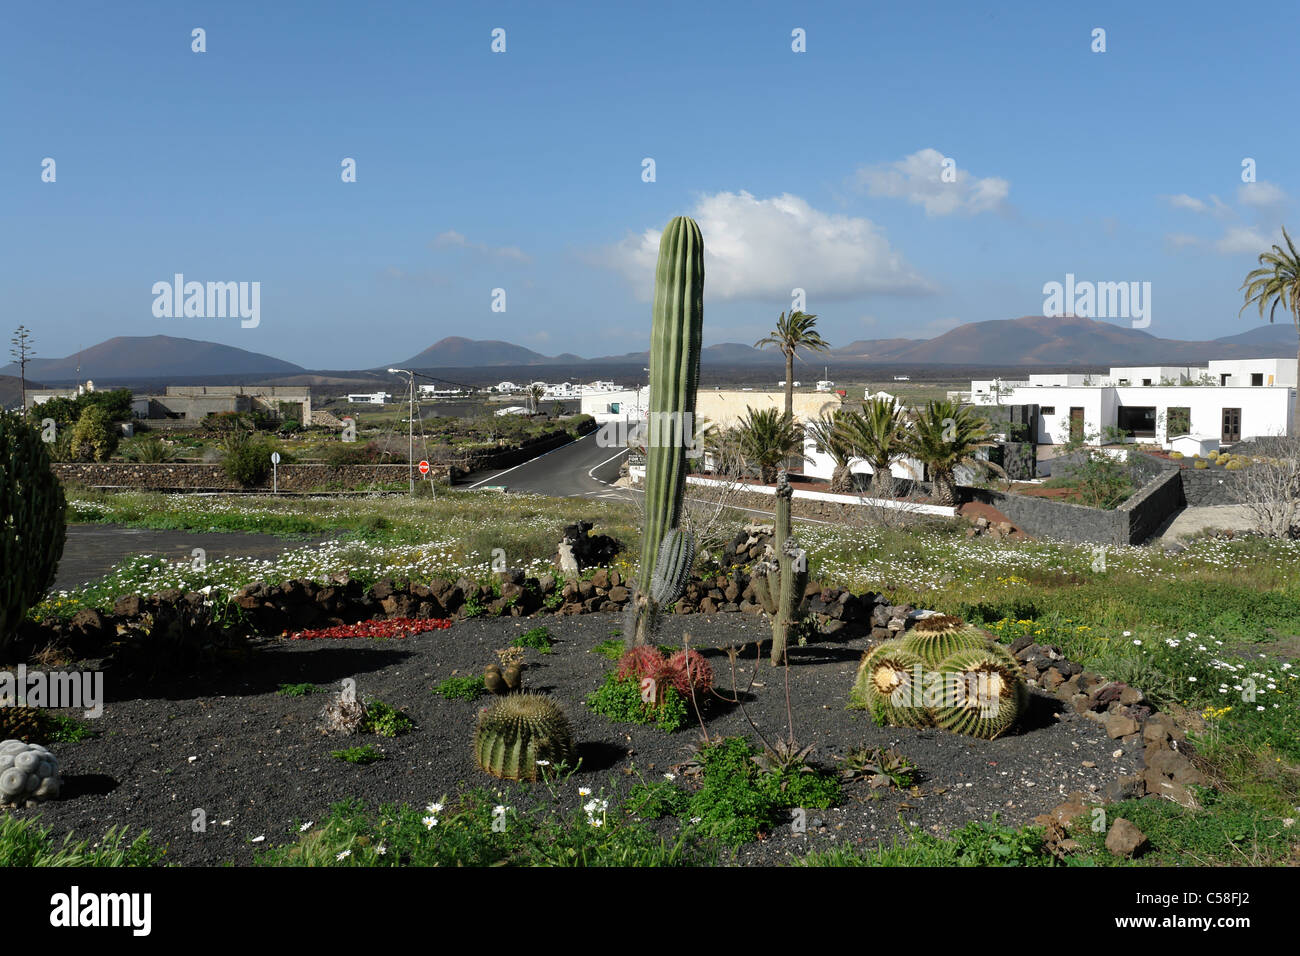 Spain, Lanzarote, Yaiza, local view, typical houses, homes, palms, cactus garden, building, construction, detail, trees, plants, Stock Photo